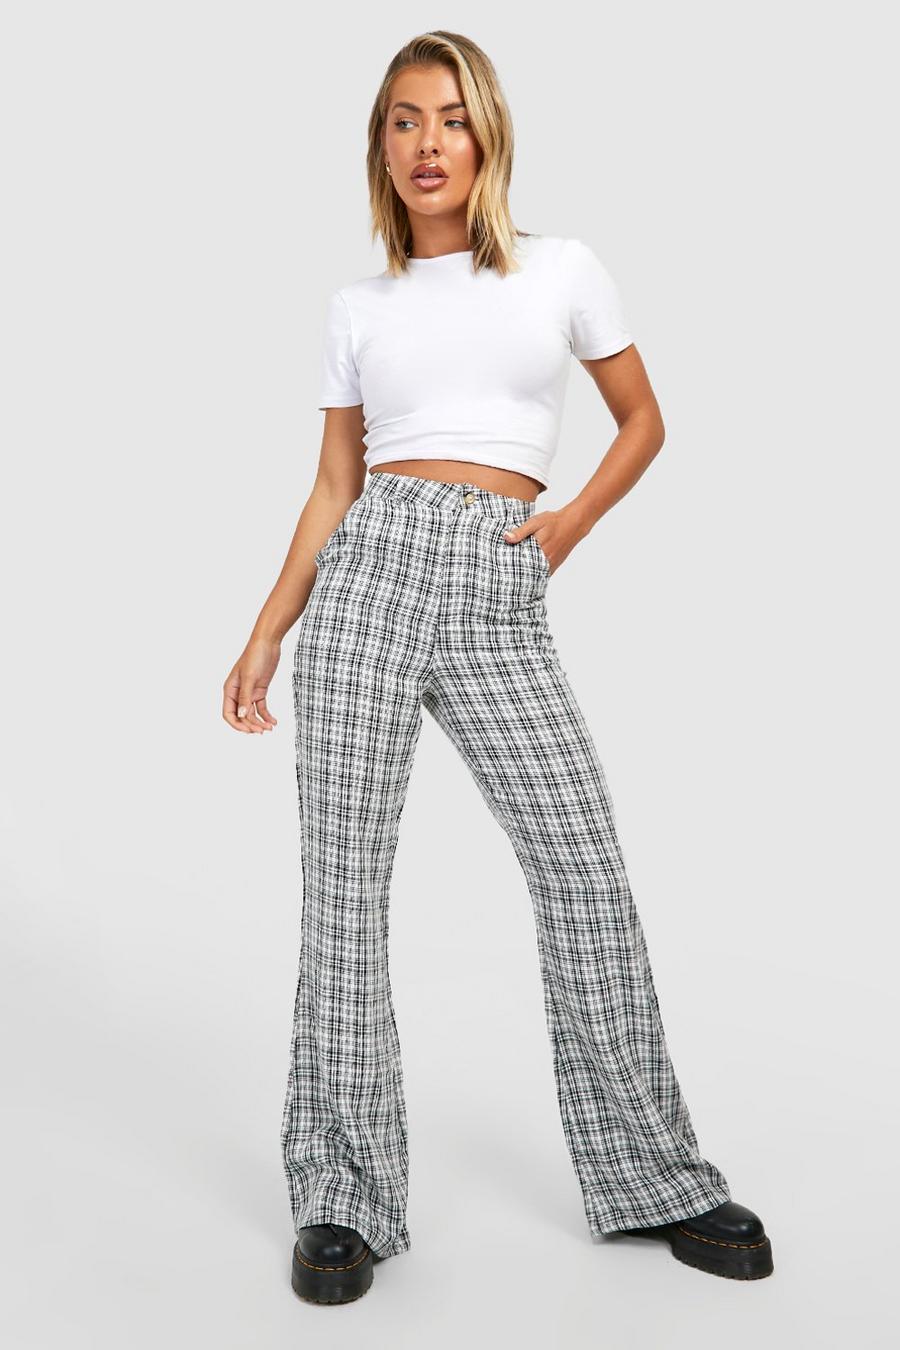 Black Plaid High Waisted Fly Front Flared Pants